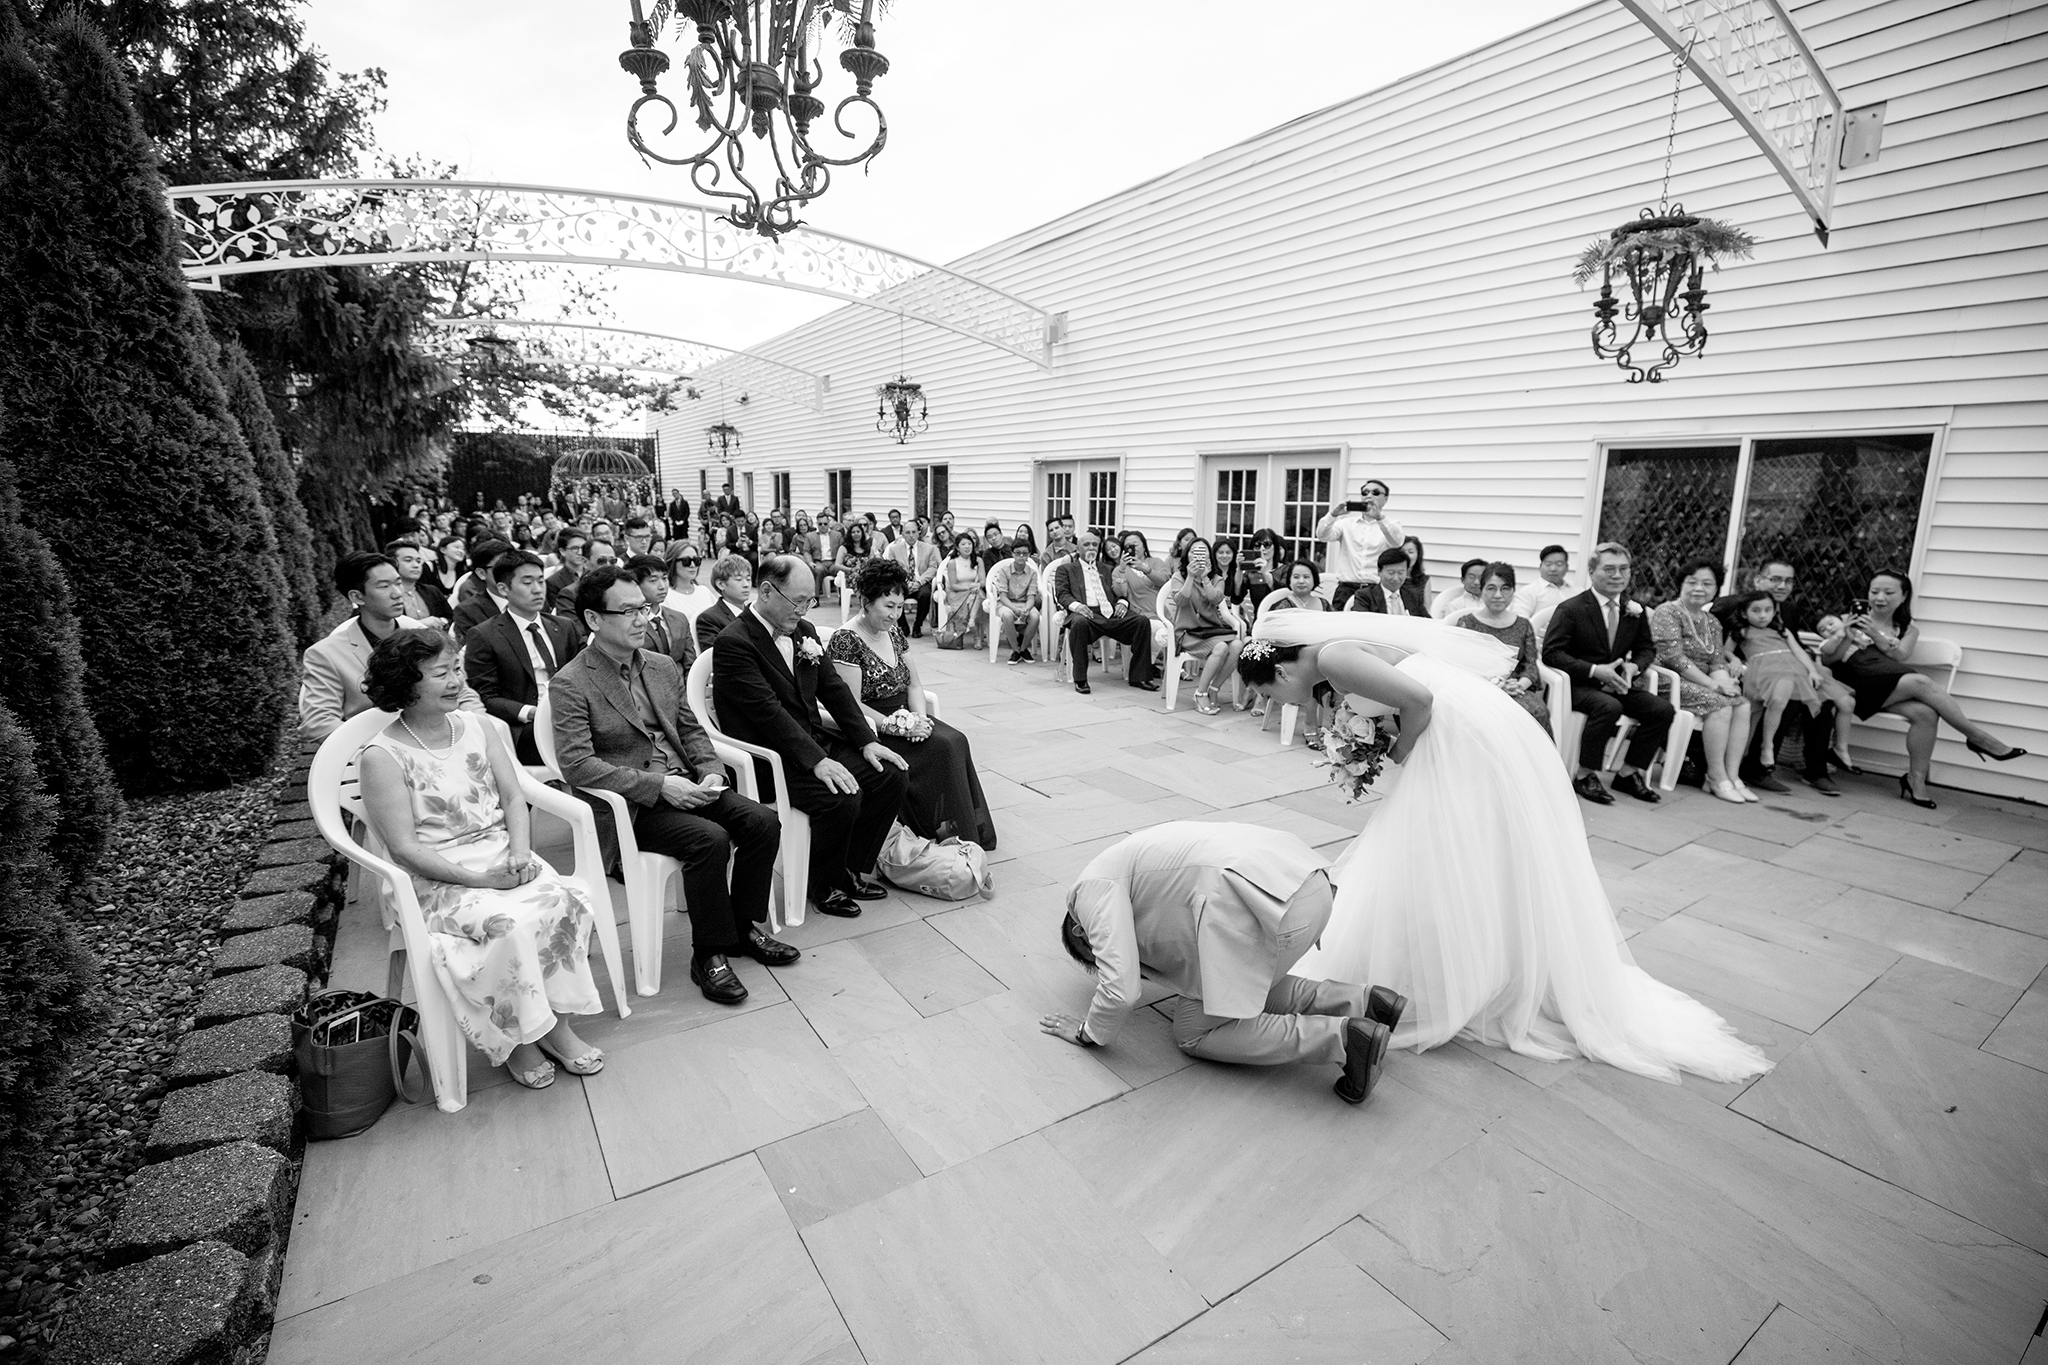 Bride and groom bowing to parents during wedding ceremony at marygold manor in buffalo ny.